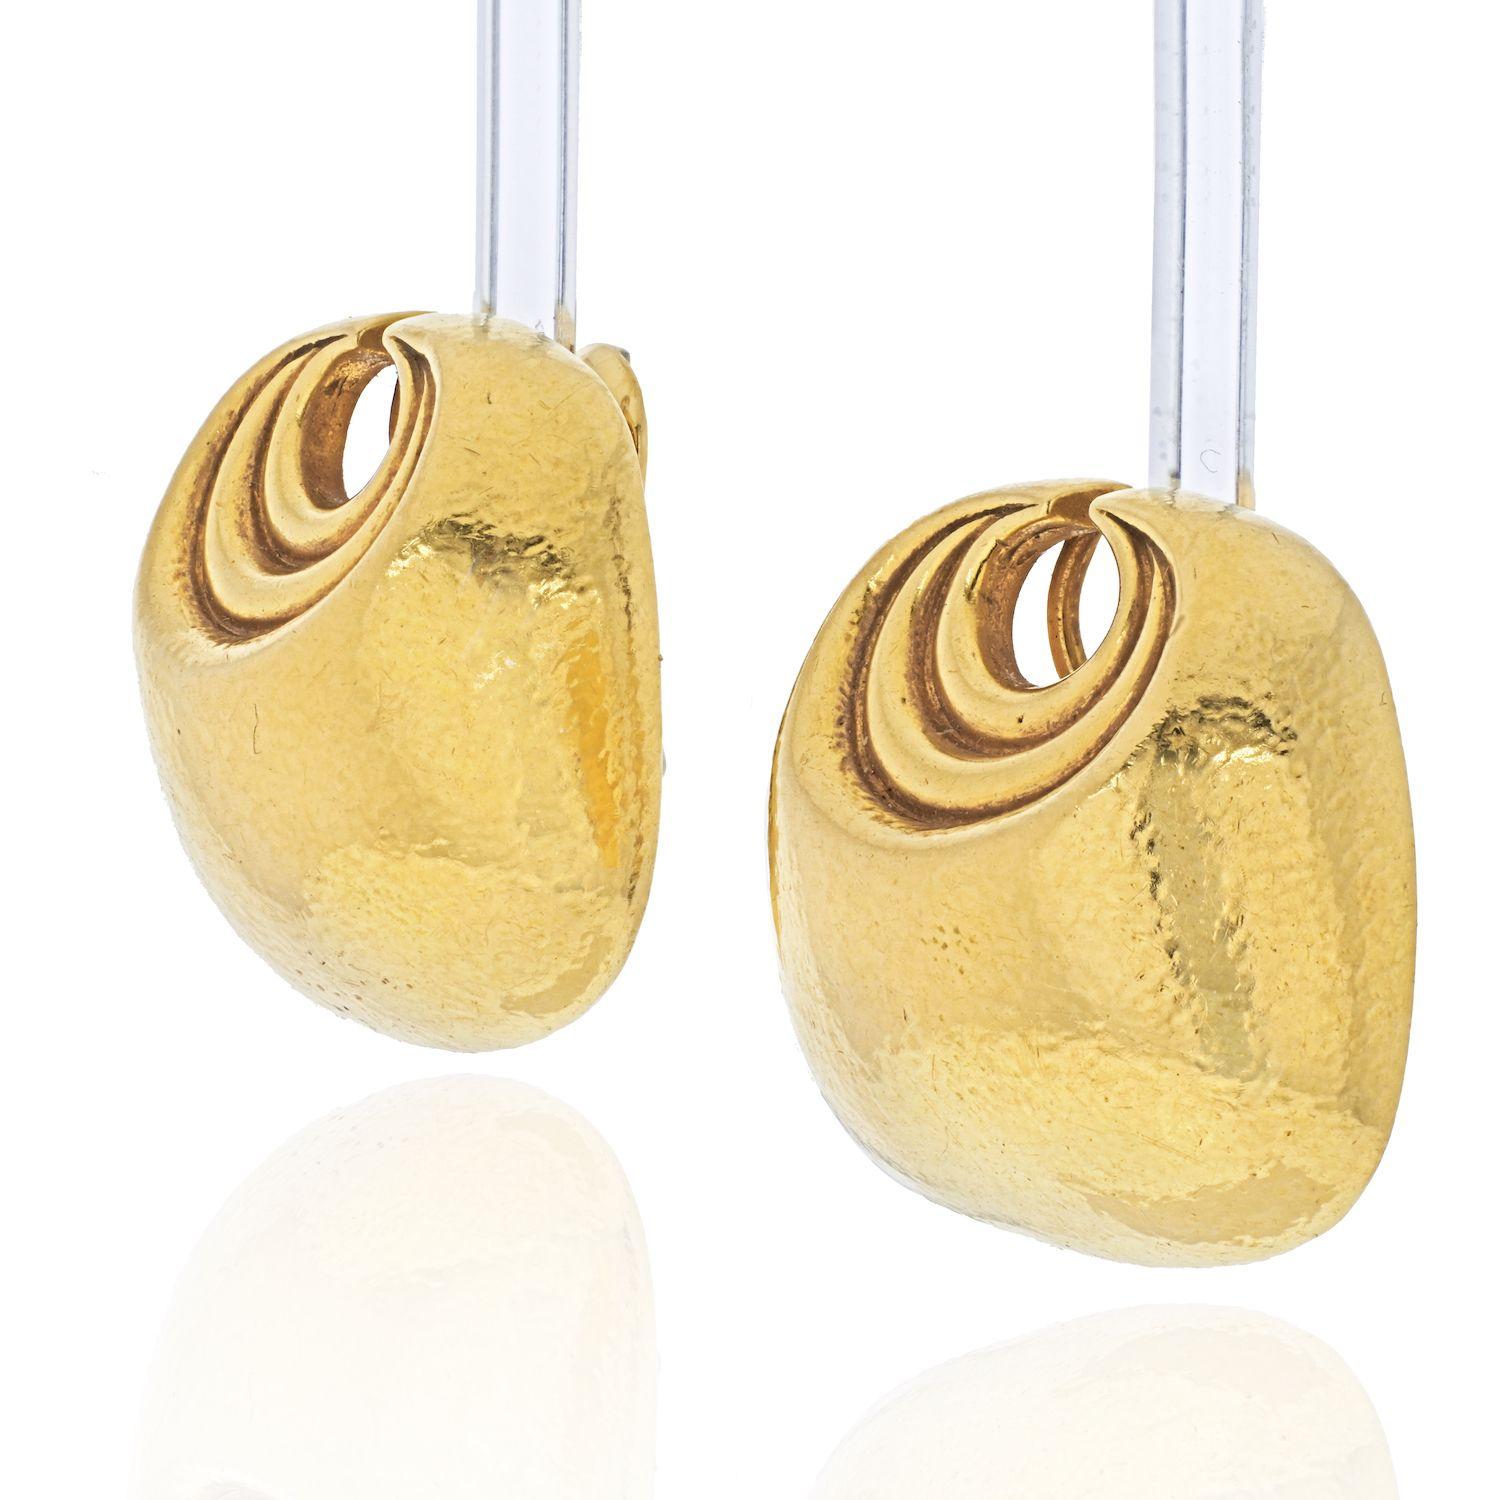 David Webb 18k yellow gold hammered crescent earrings. Yellow gold earrings feature a crescent shape design with twisted grooves.

30mm wide. 

40gr. 